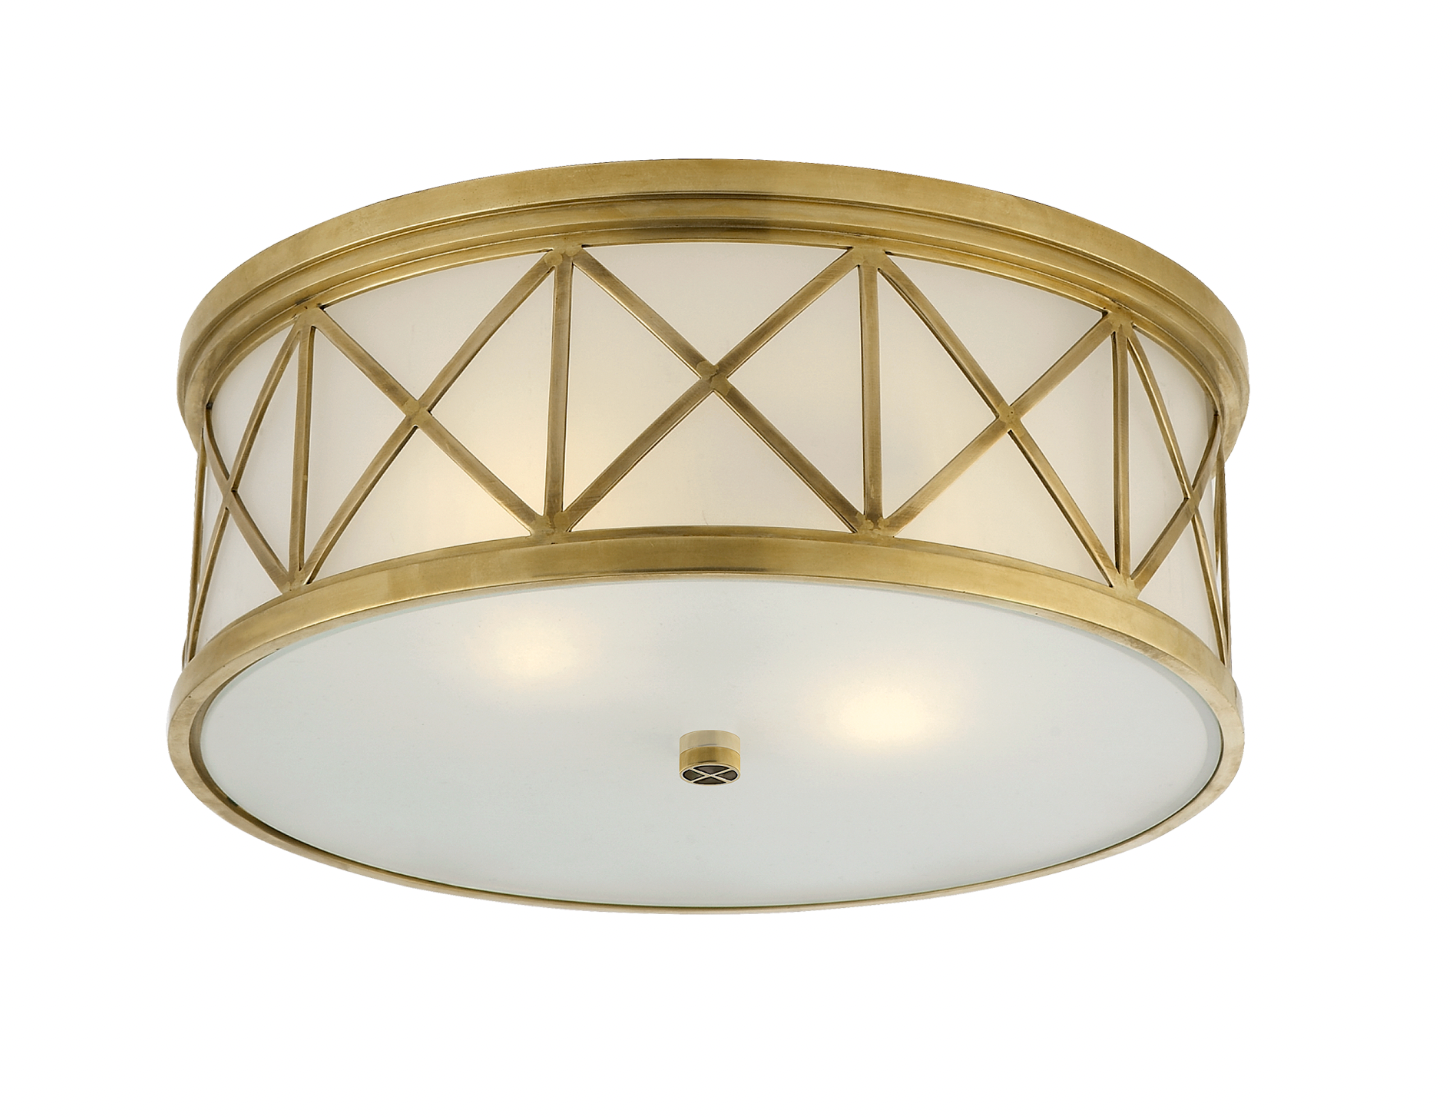 Montpelier Large Flush Mount in Antique Brass by Visual Comfort Item SK 4011HAB-FG | Newport Lamp And Shade | Located in Newport, RI